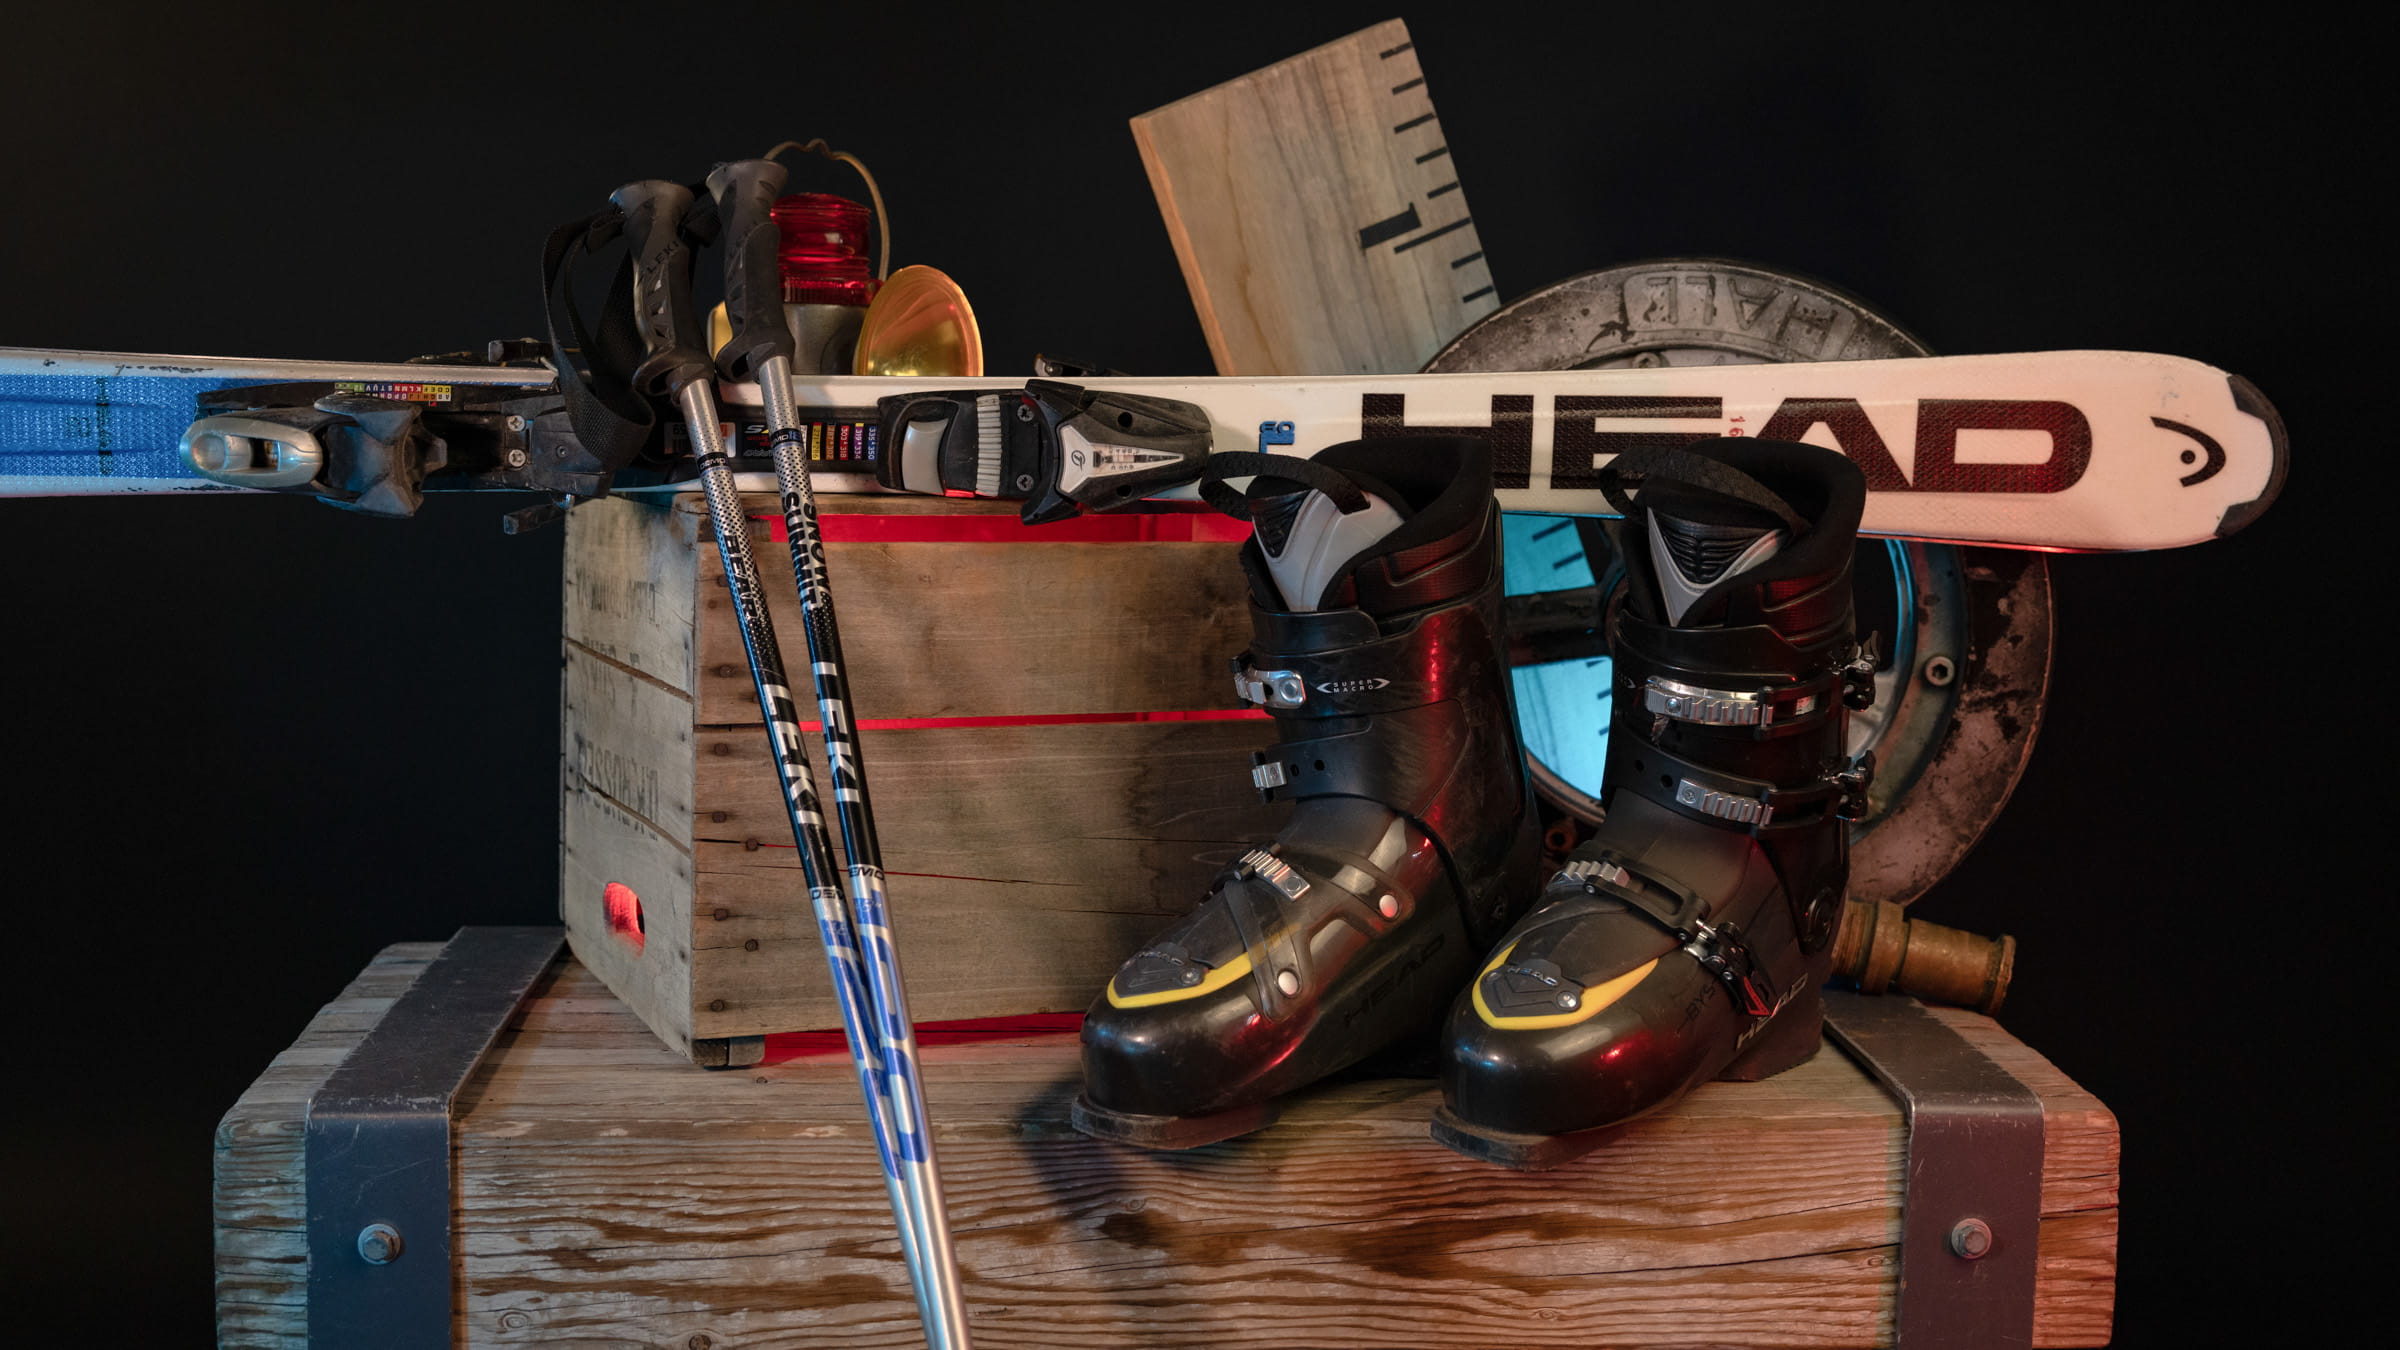 Ski boots, poles, and skis displayed upon a wooden box